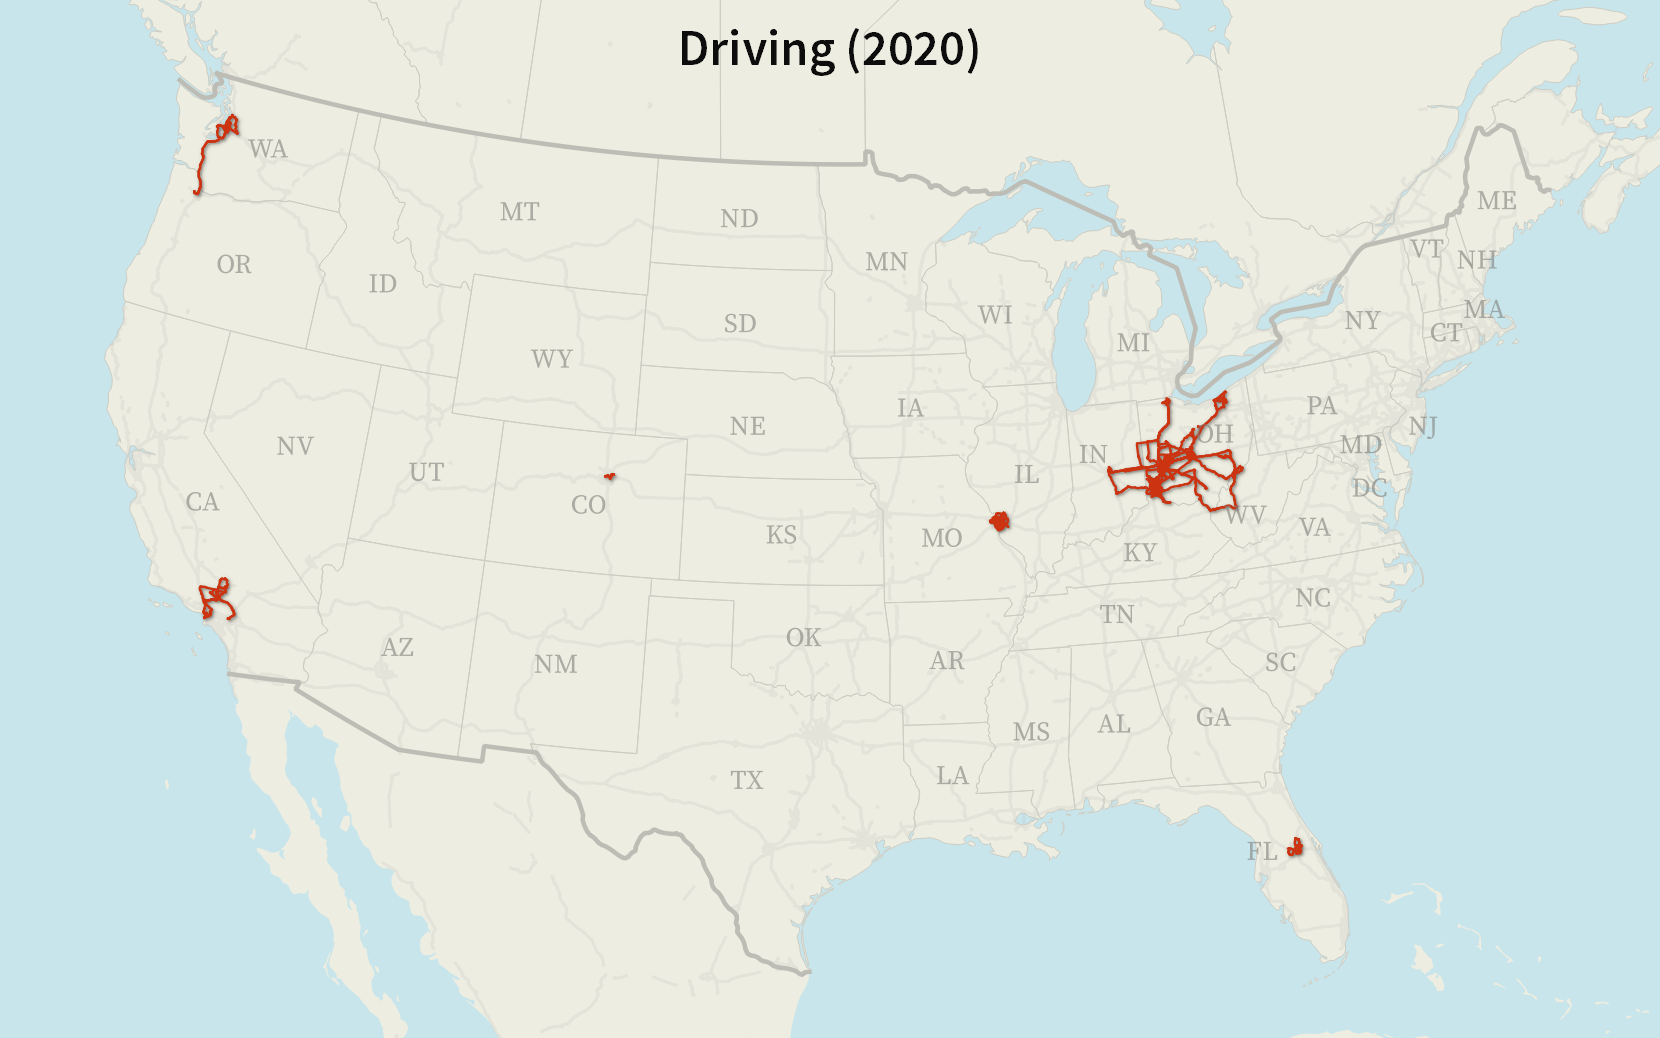 A map of the United States with driving tracks. A large cluster of tracks covers Ohio, Indiana, West Virginia, and northern Kentucky. There are also smaller driving tracks in Orlando, Los Angeles, St. Louis, Denver, and a track from Seattle to Portland.